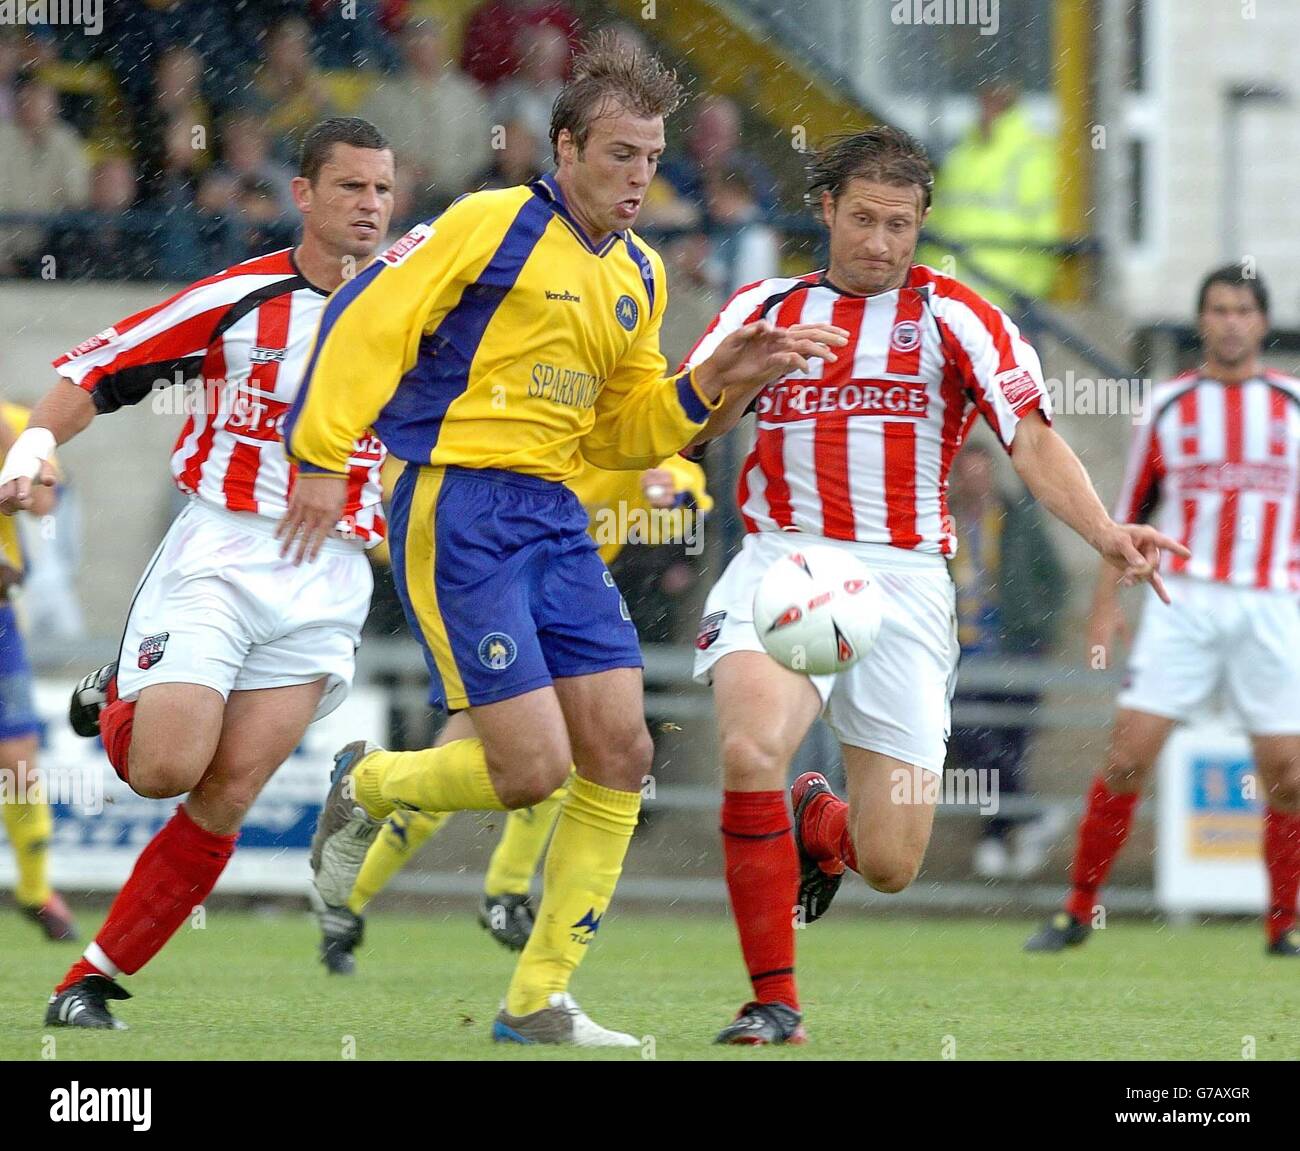 Bruno Meirelles of Torquay is challenged by Stewart Talbot & Chris Hargreaves of Brentford, during their Coca Cola League One match at Plainmoor, Torquay. NO UNOFFICIAL CLUB WEBSITE USE. Stock Photo